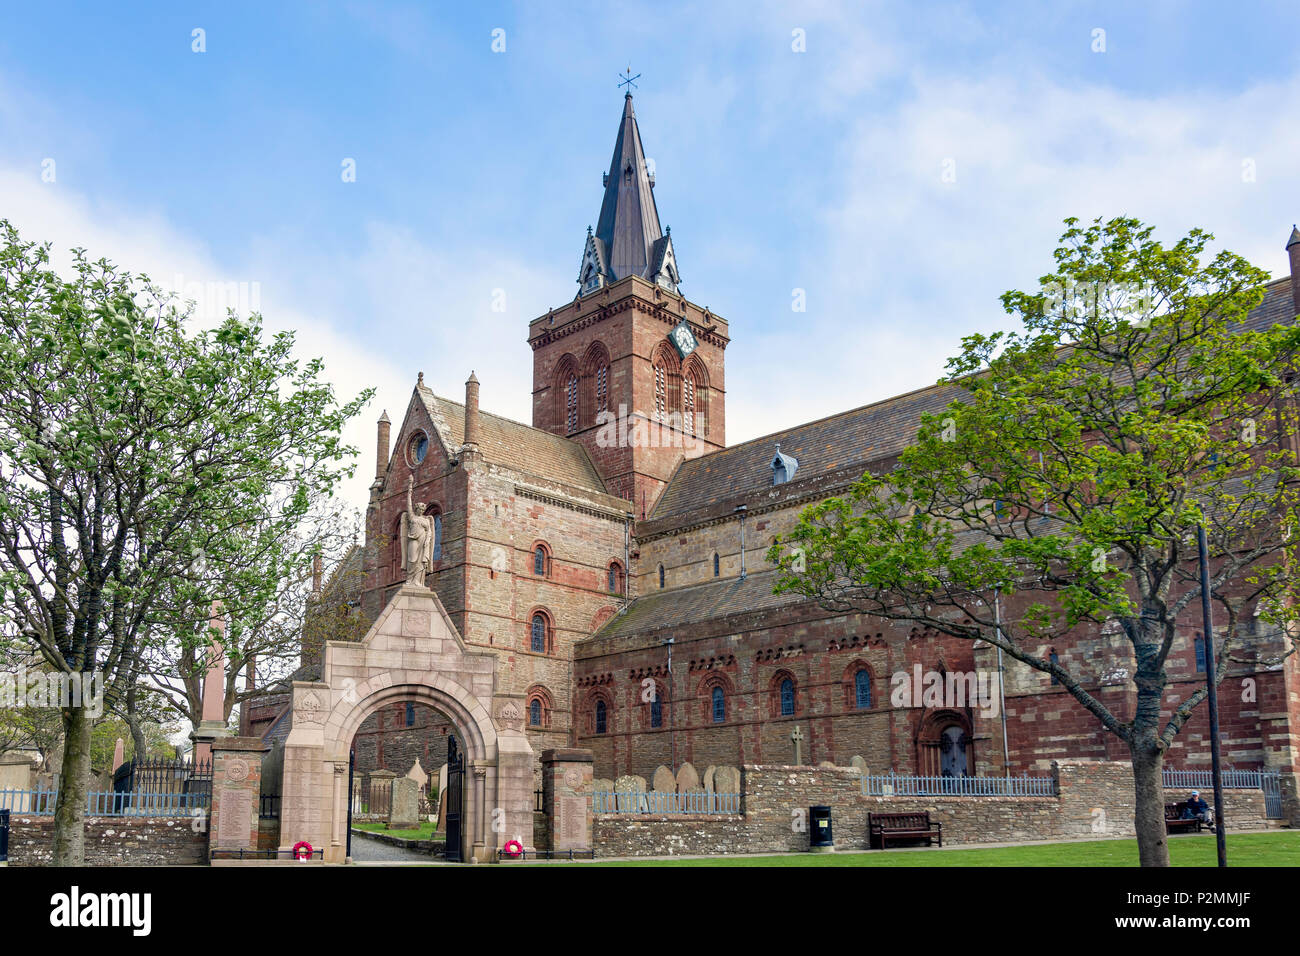 St Magnus Cathedral, Broad Street, Kirkwall, Orkney, continentale, îles du Nord, Ecosse, Royaume-Uni Banque D'Images